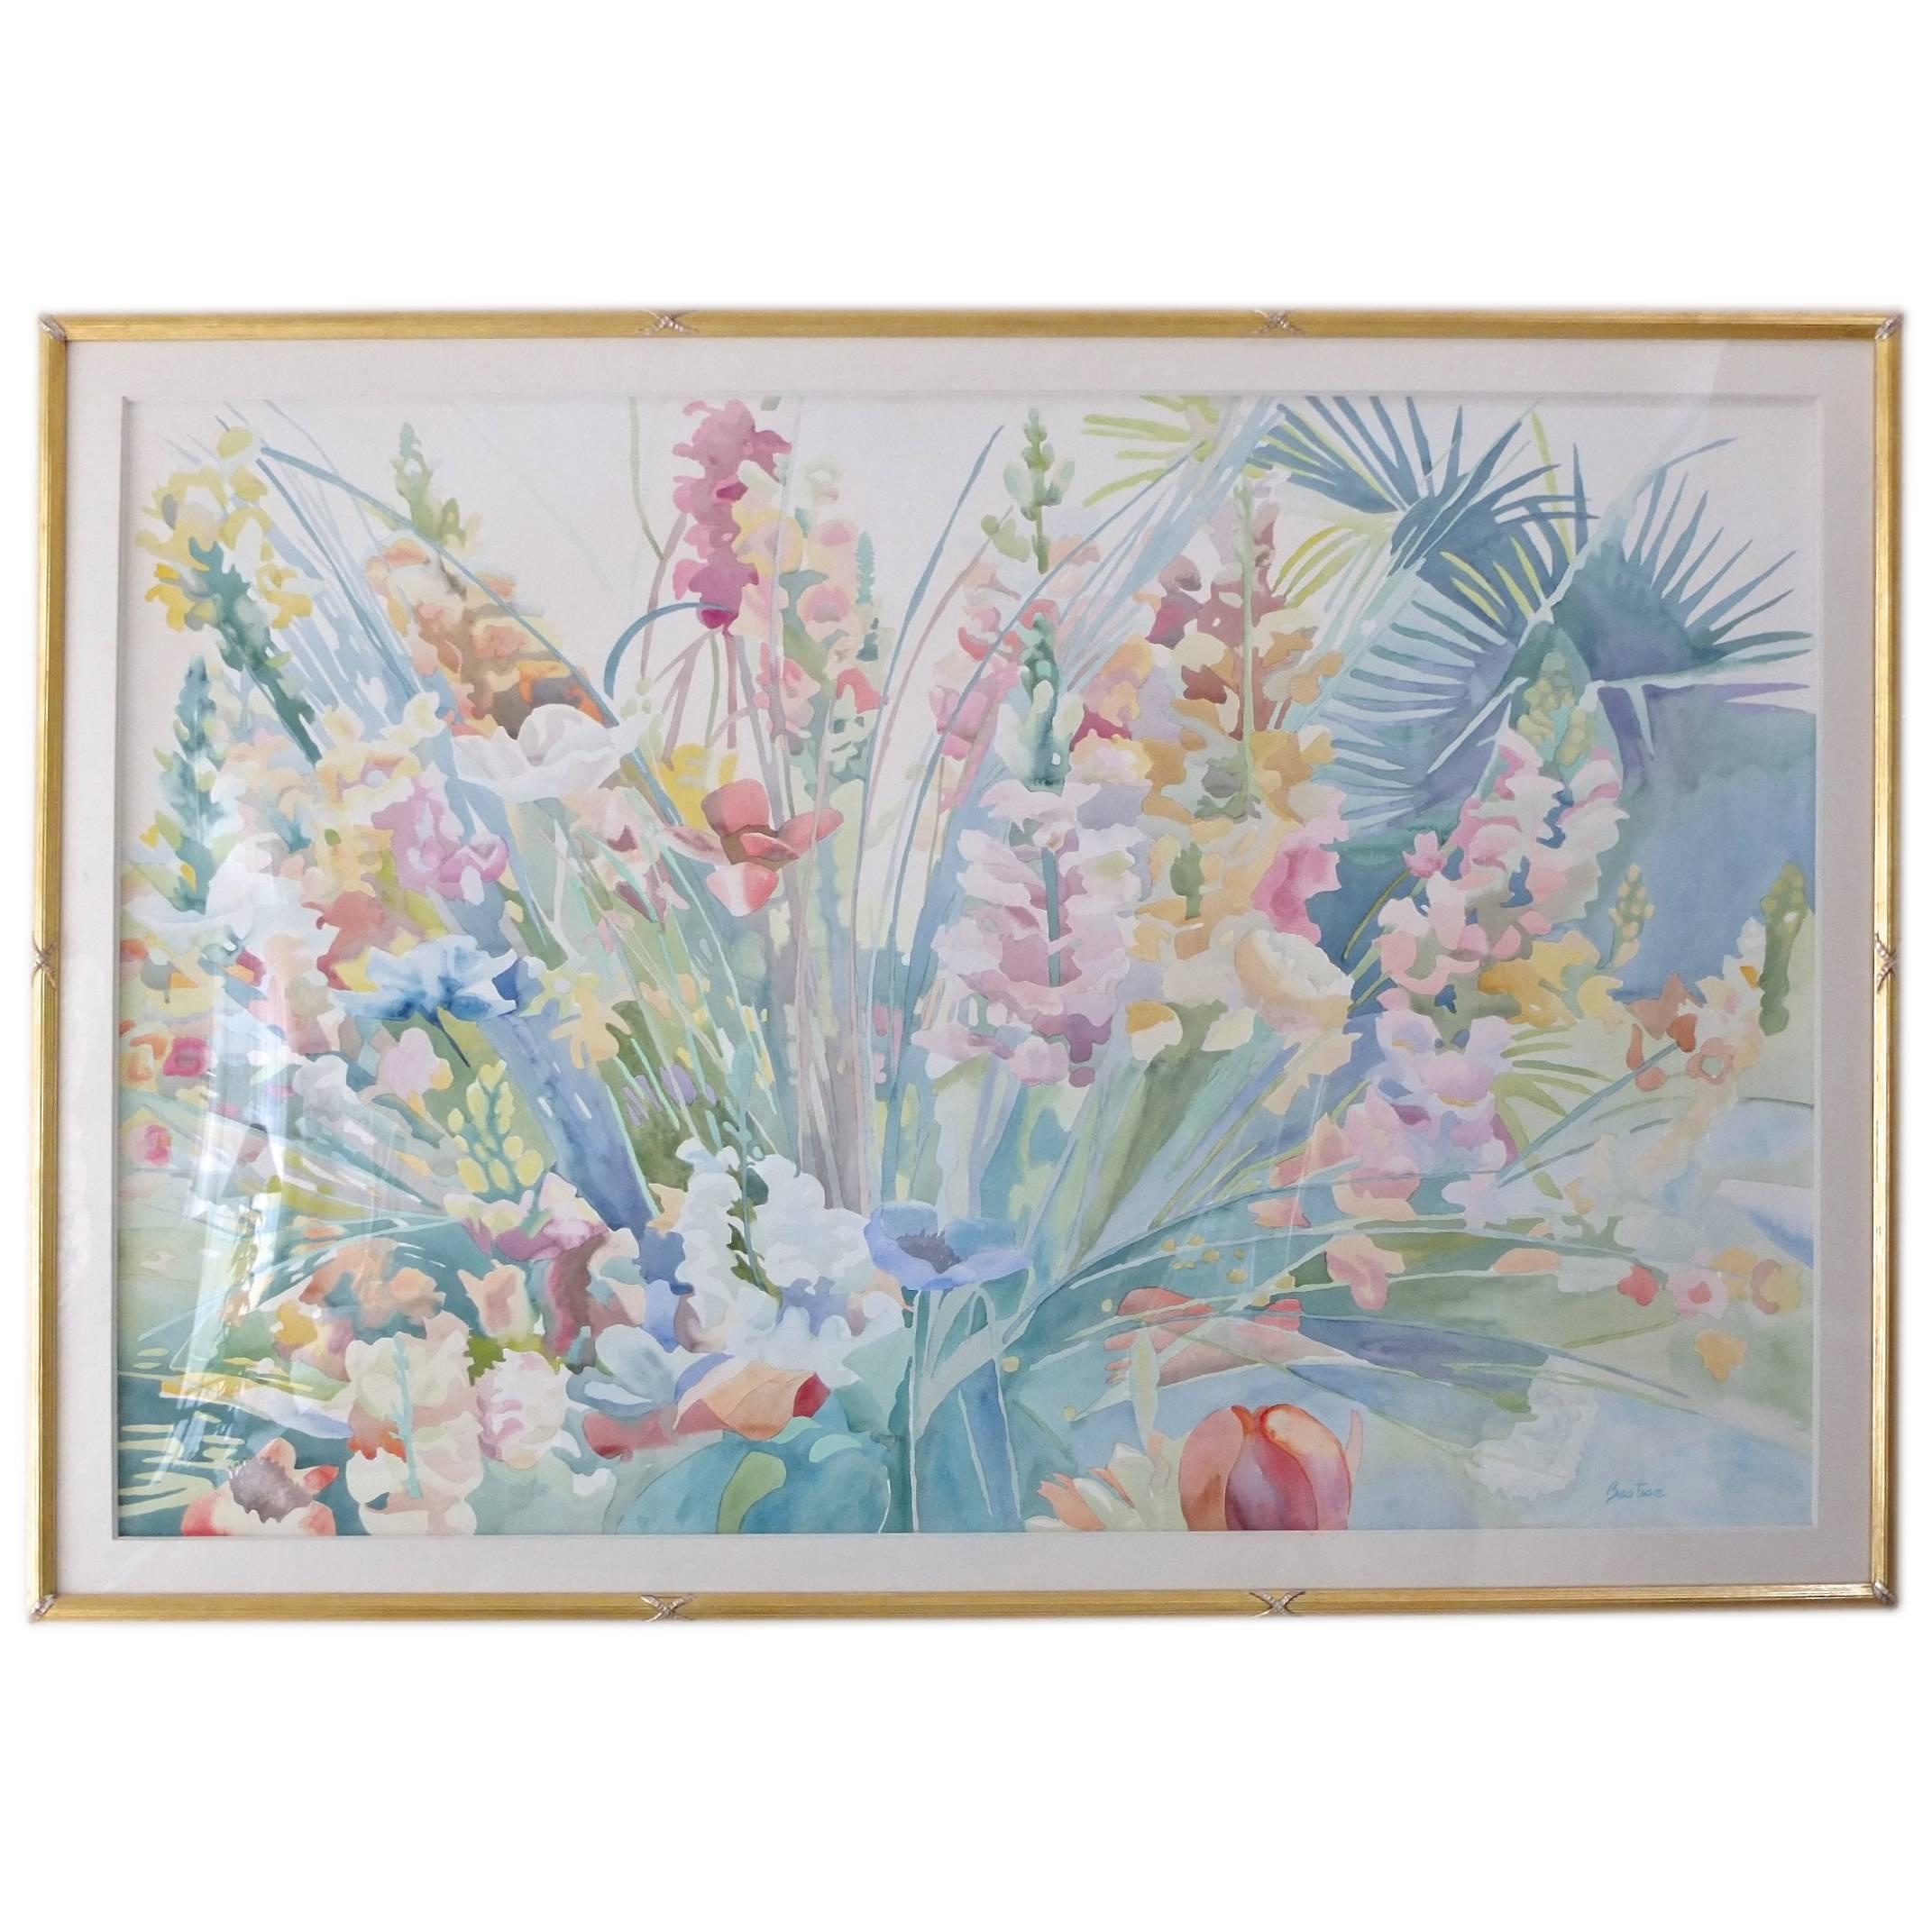 Large-Scale Watercolor "Spring Blossoms" by Linda Bastian For Sale